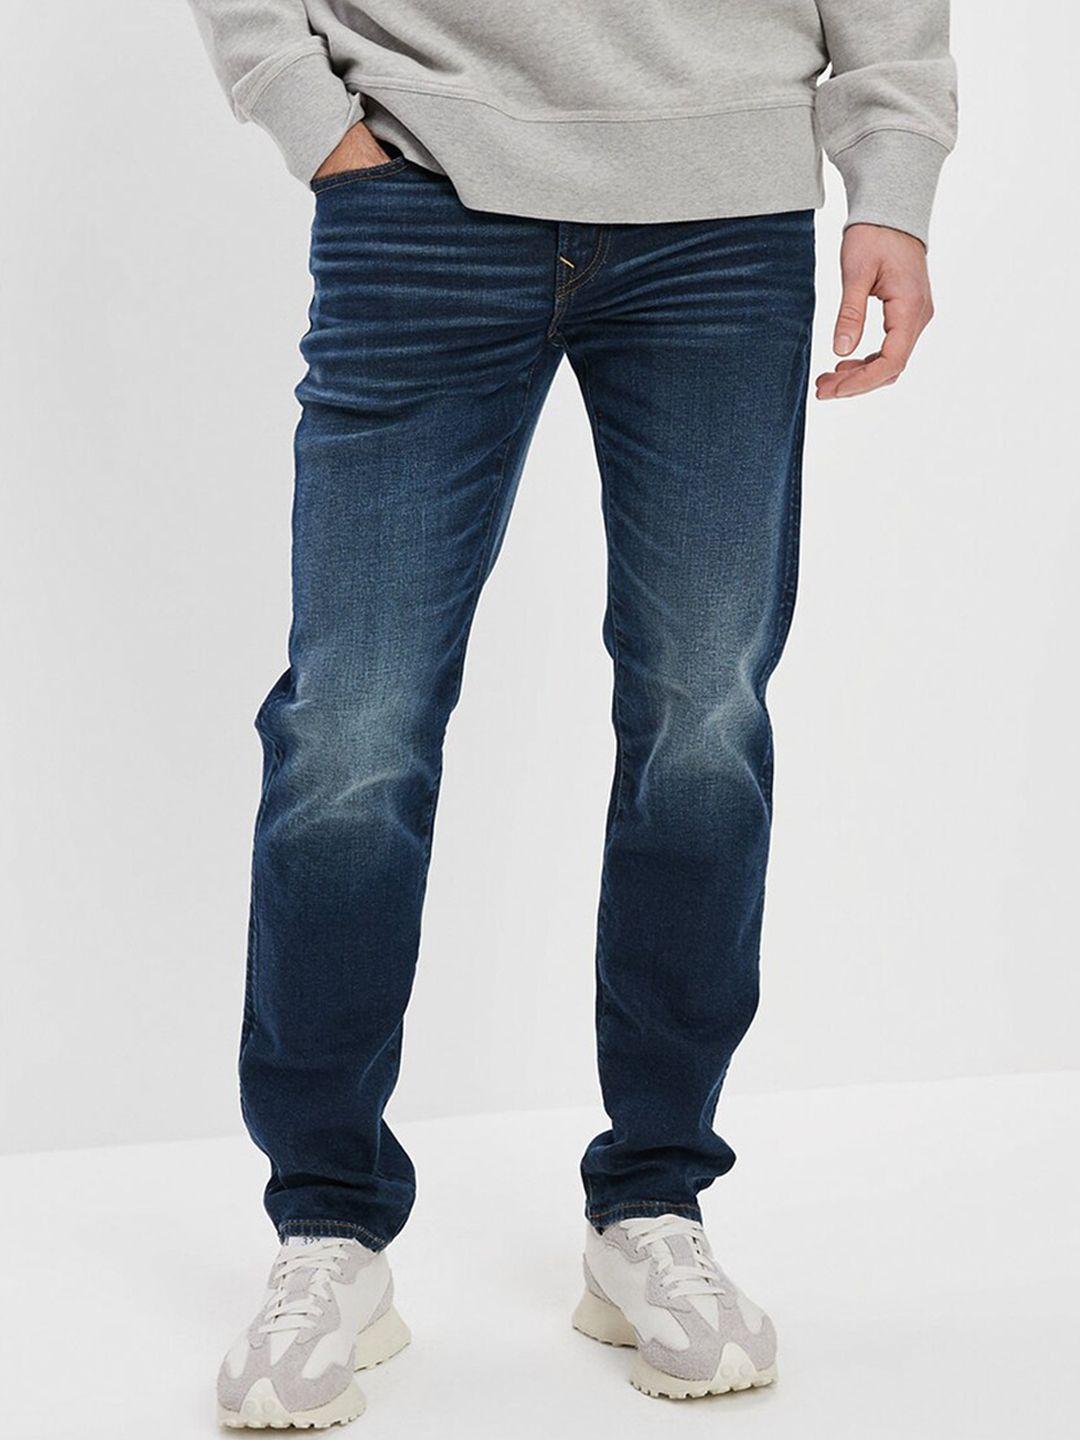 american-eagle-outfitters-men-clean-look-mid-rise-straight-fit-heavy-fade-jeans